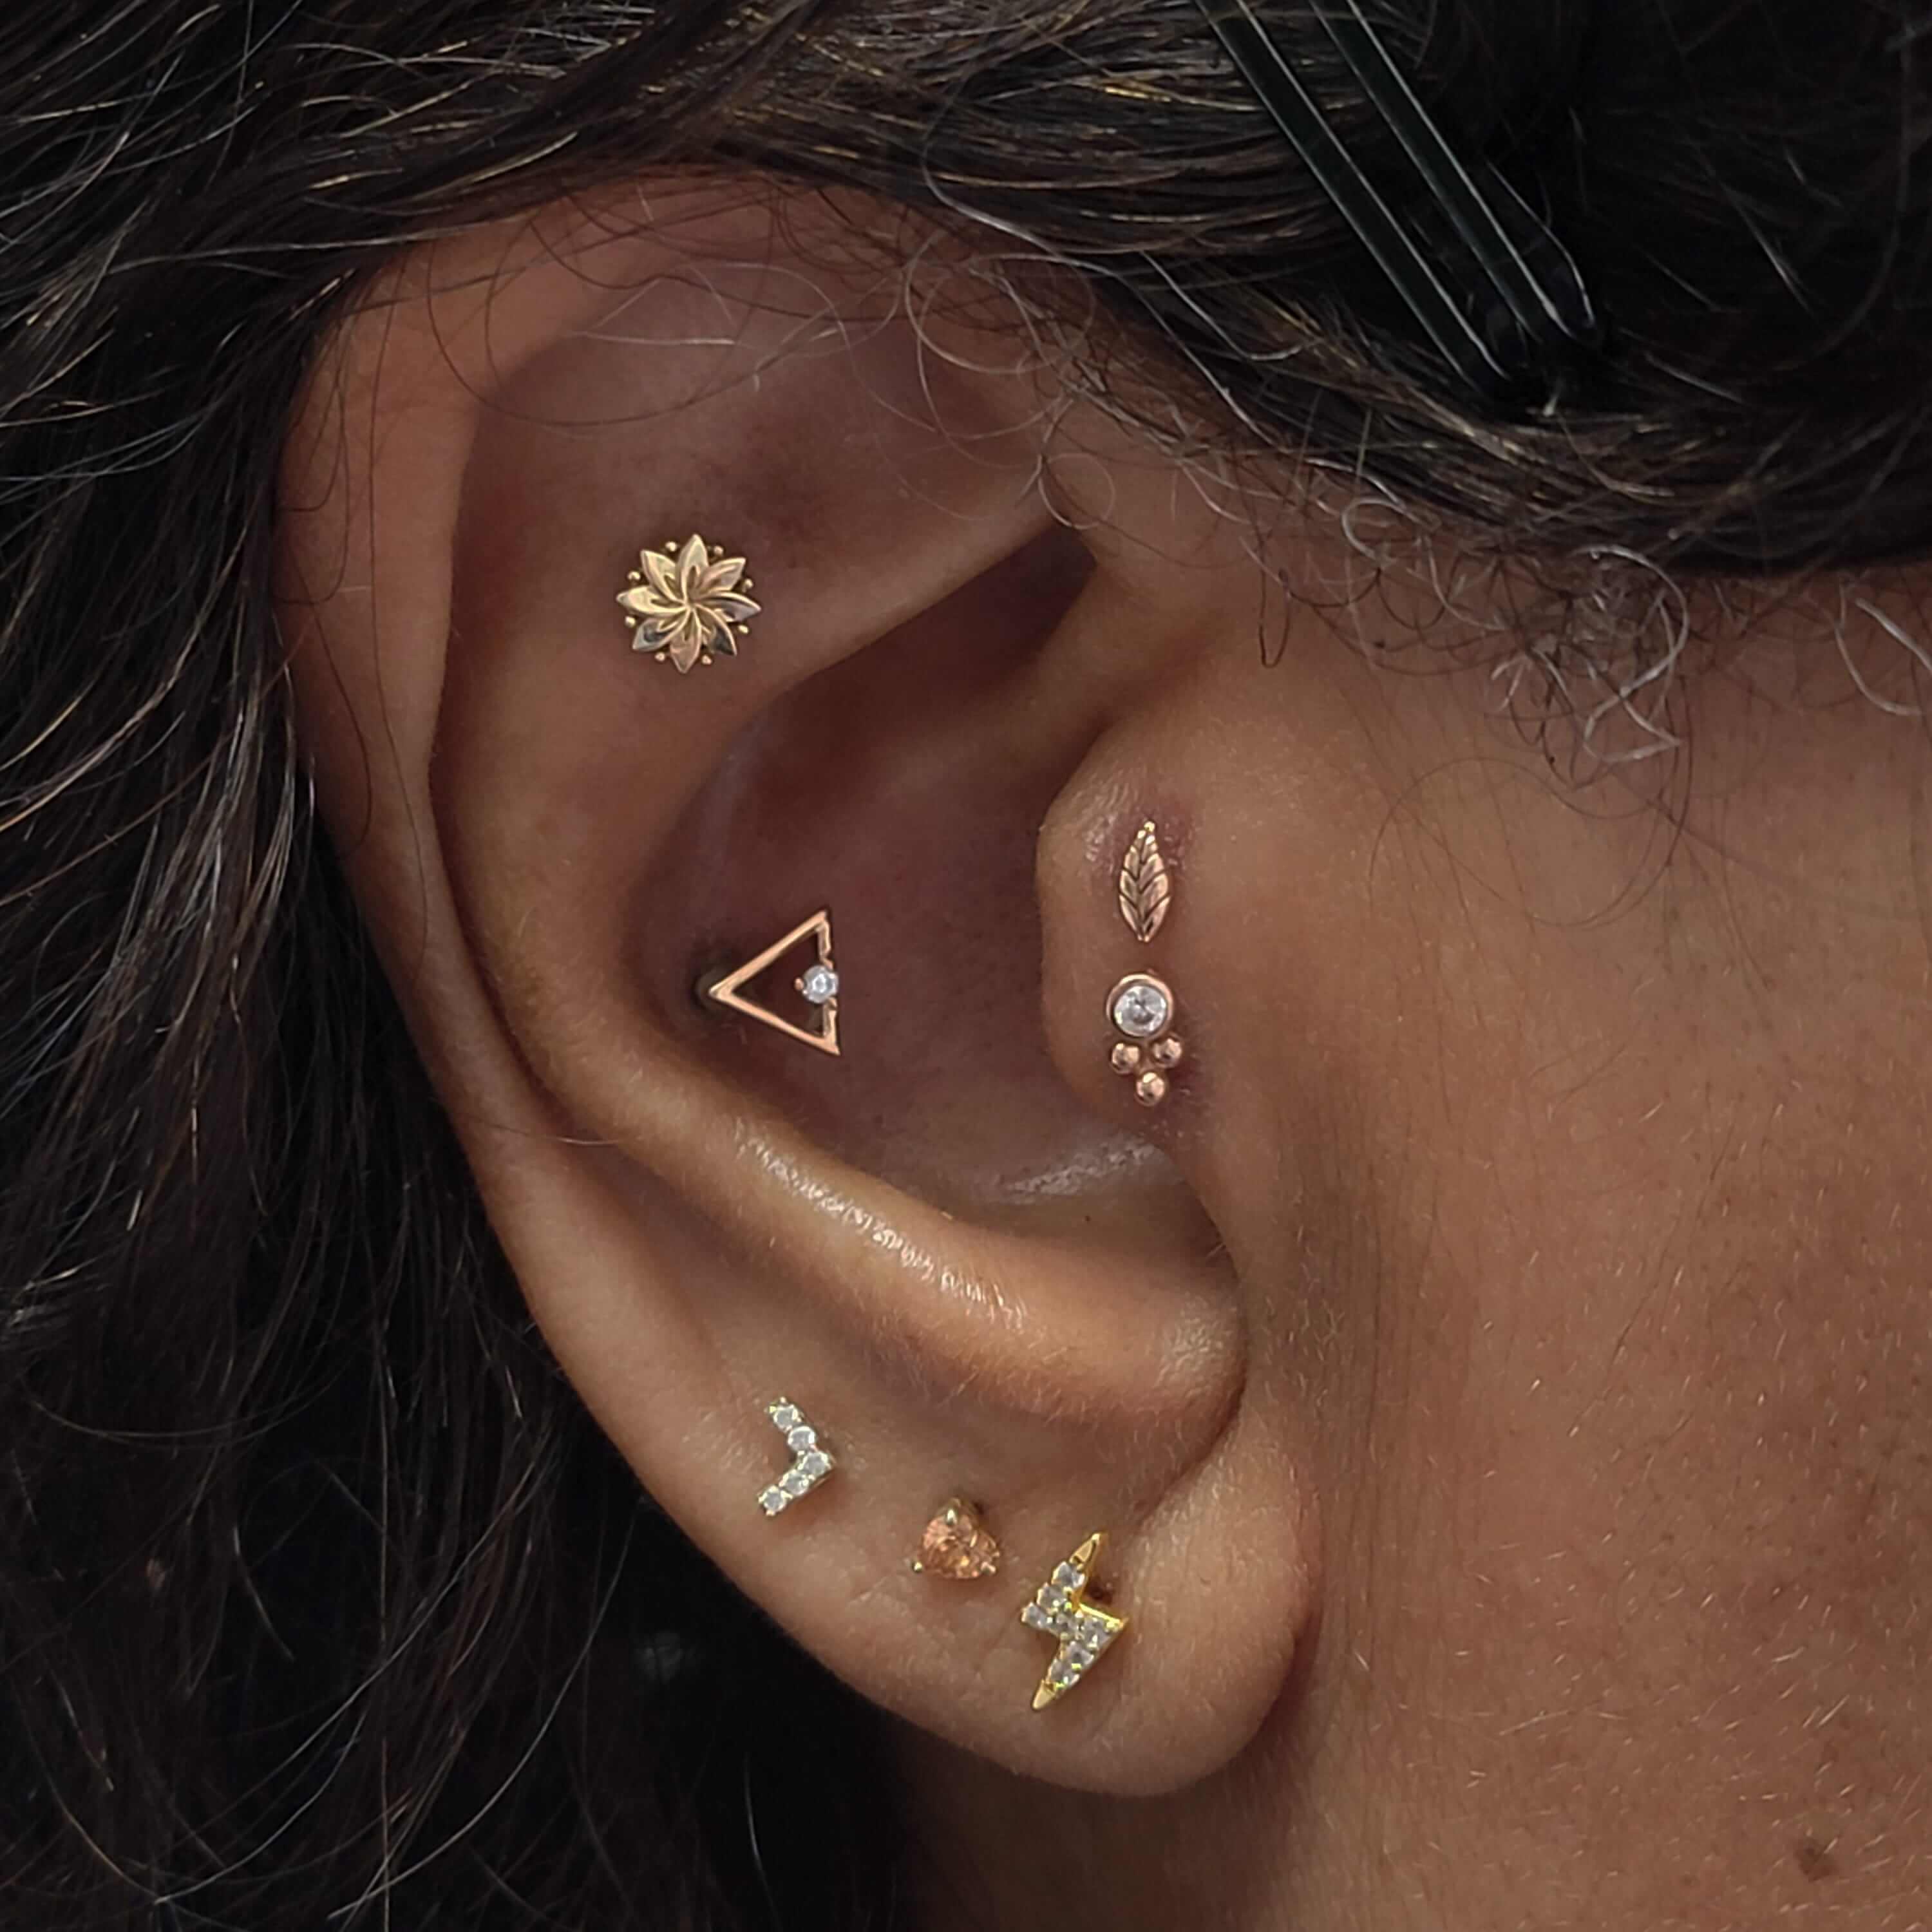 Ear project done with an assortment of 14k gold